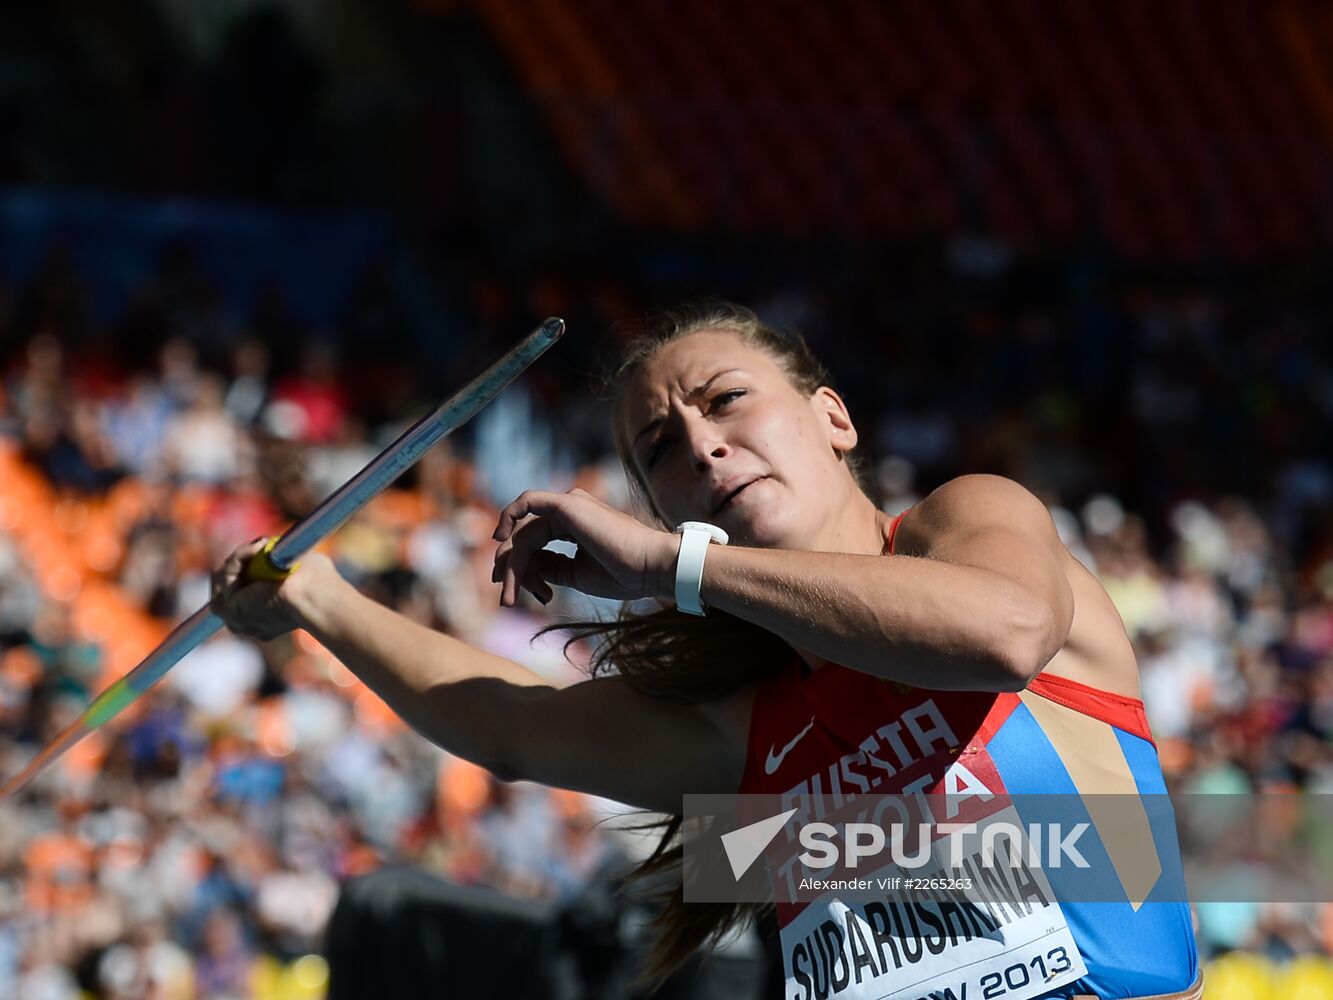 2013 IAAF World Championships. Day Seven. Morning session